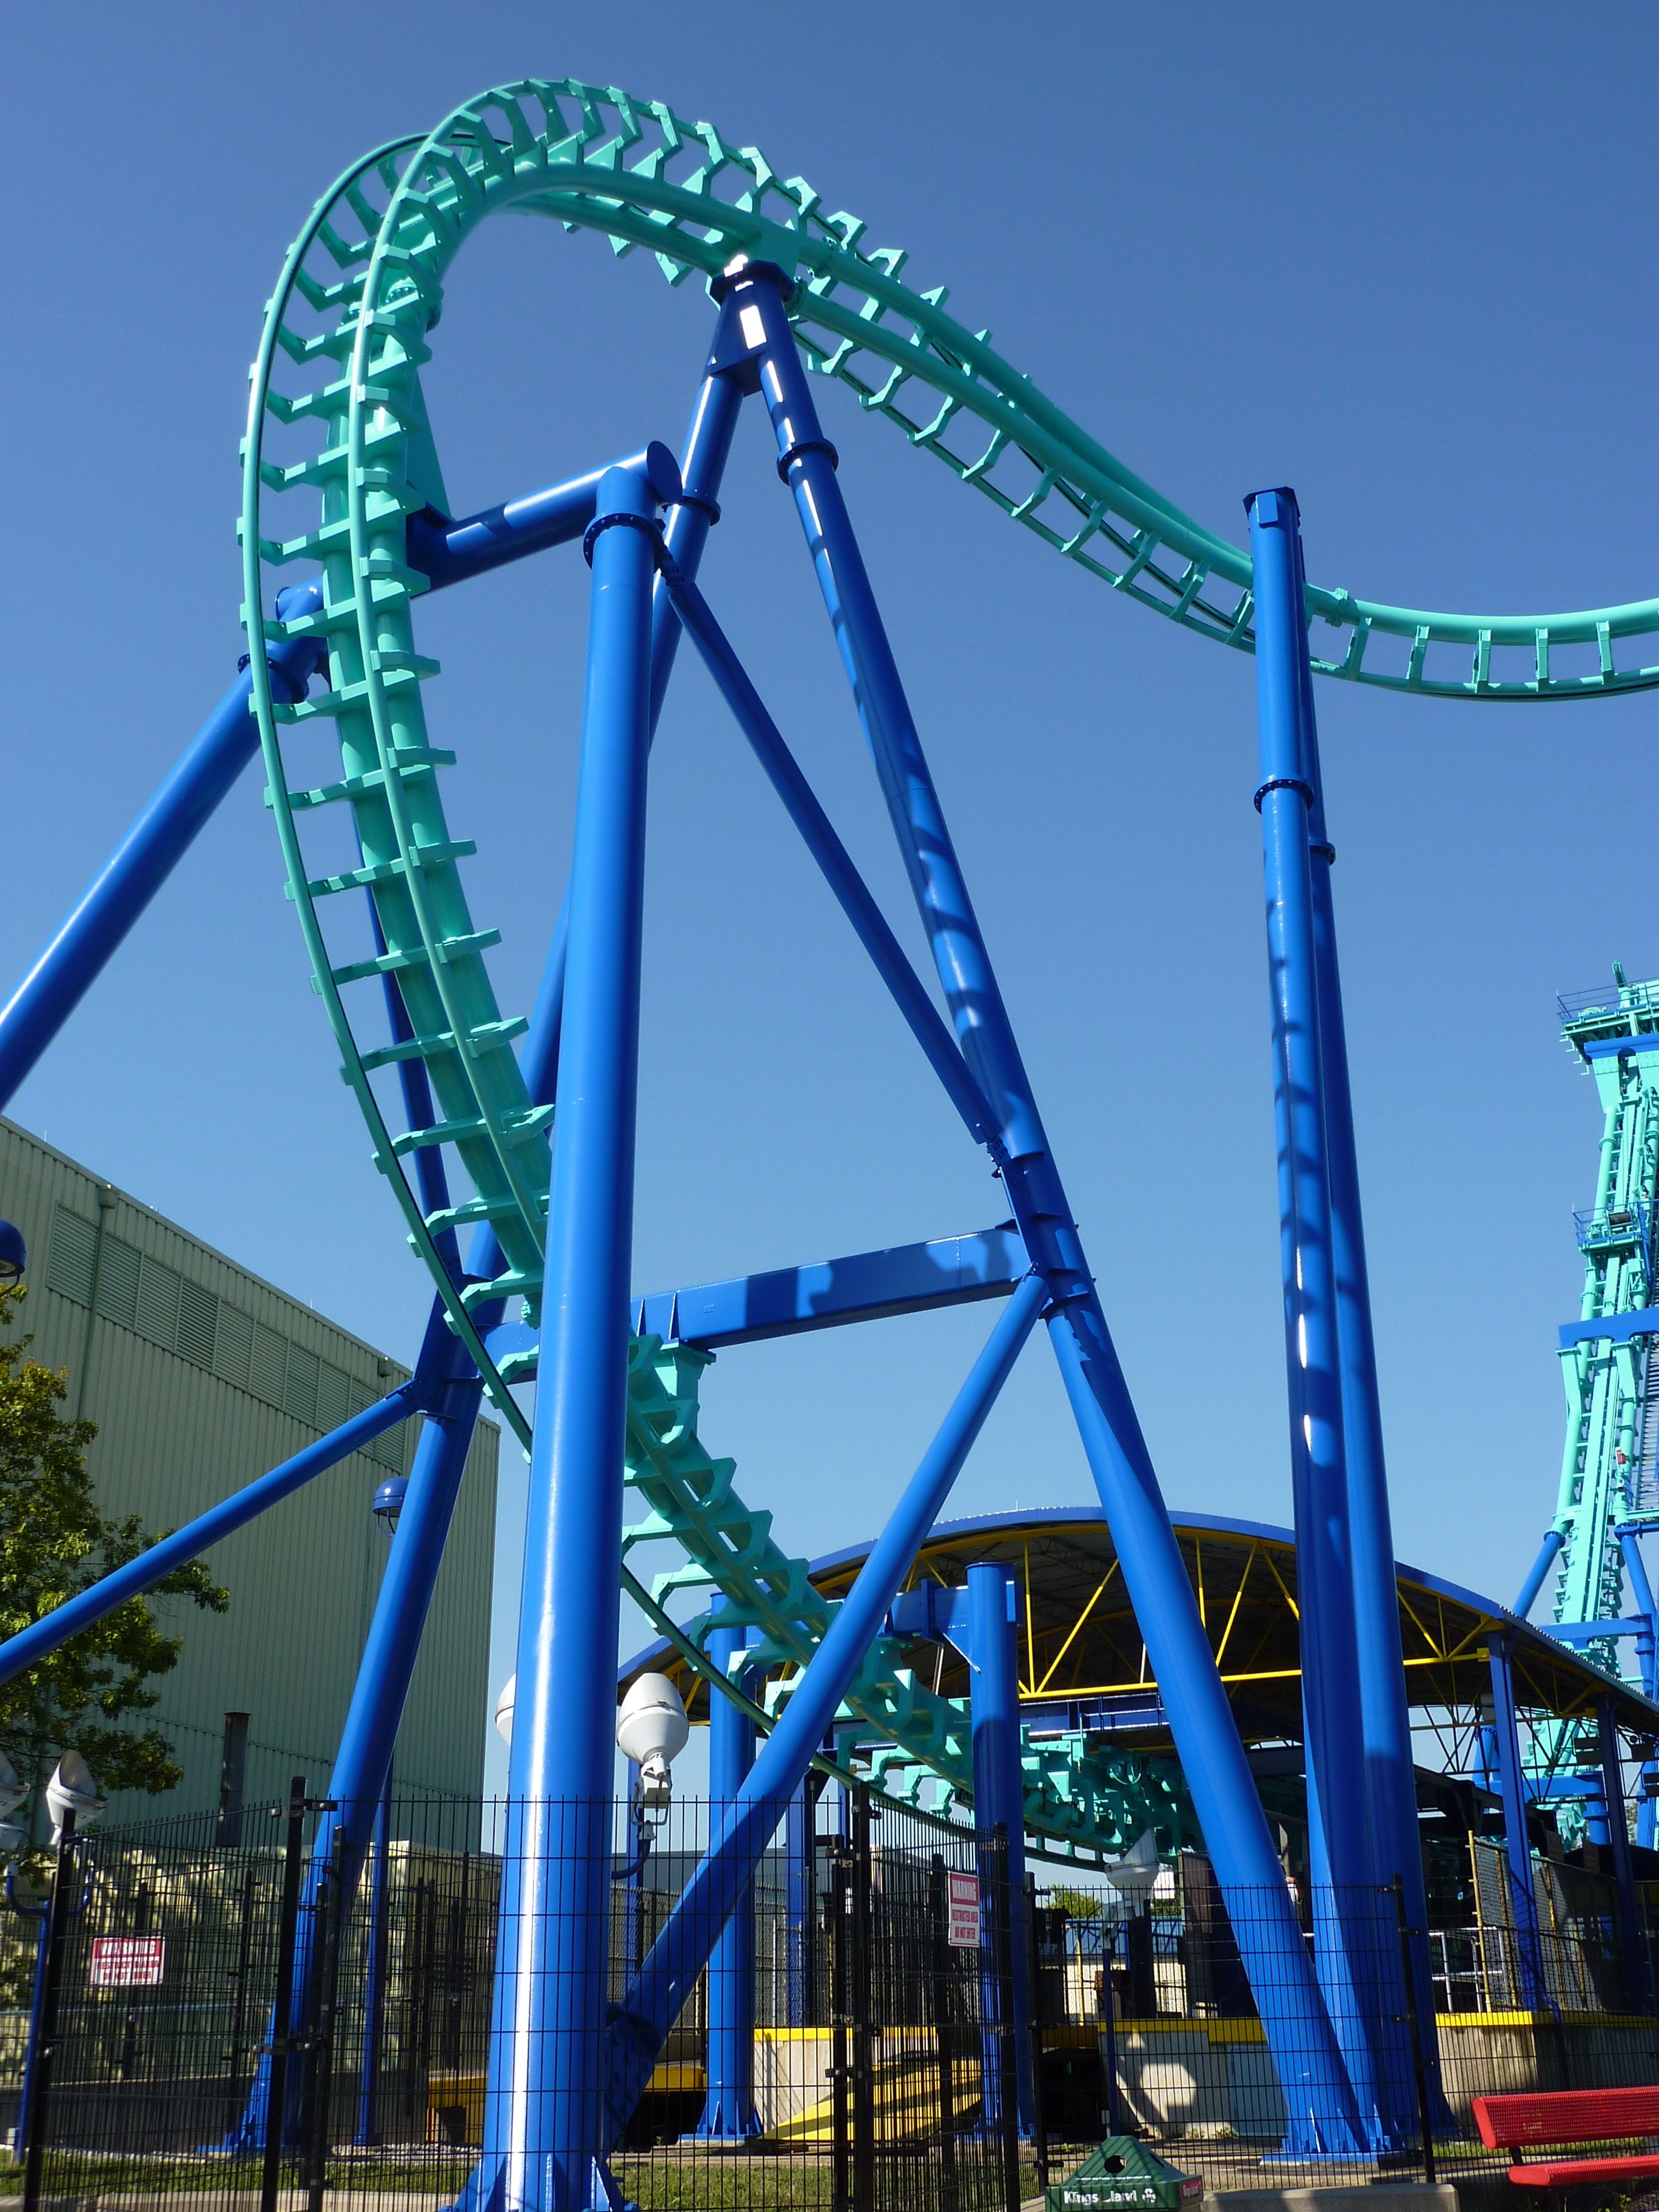 blue and green coaster ride photo